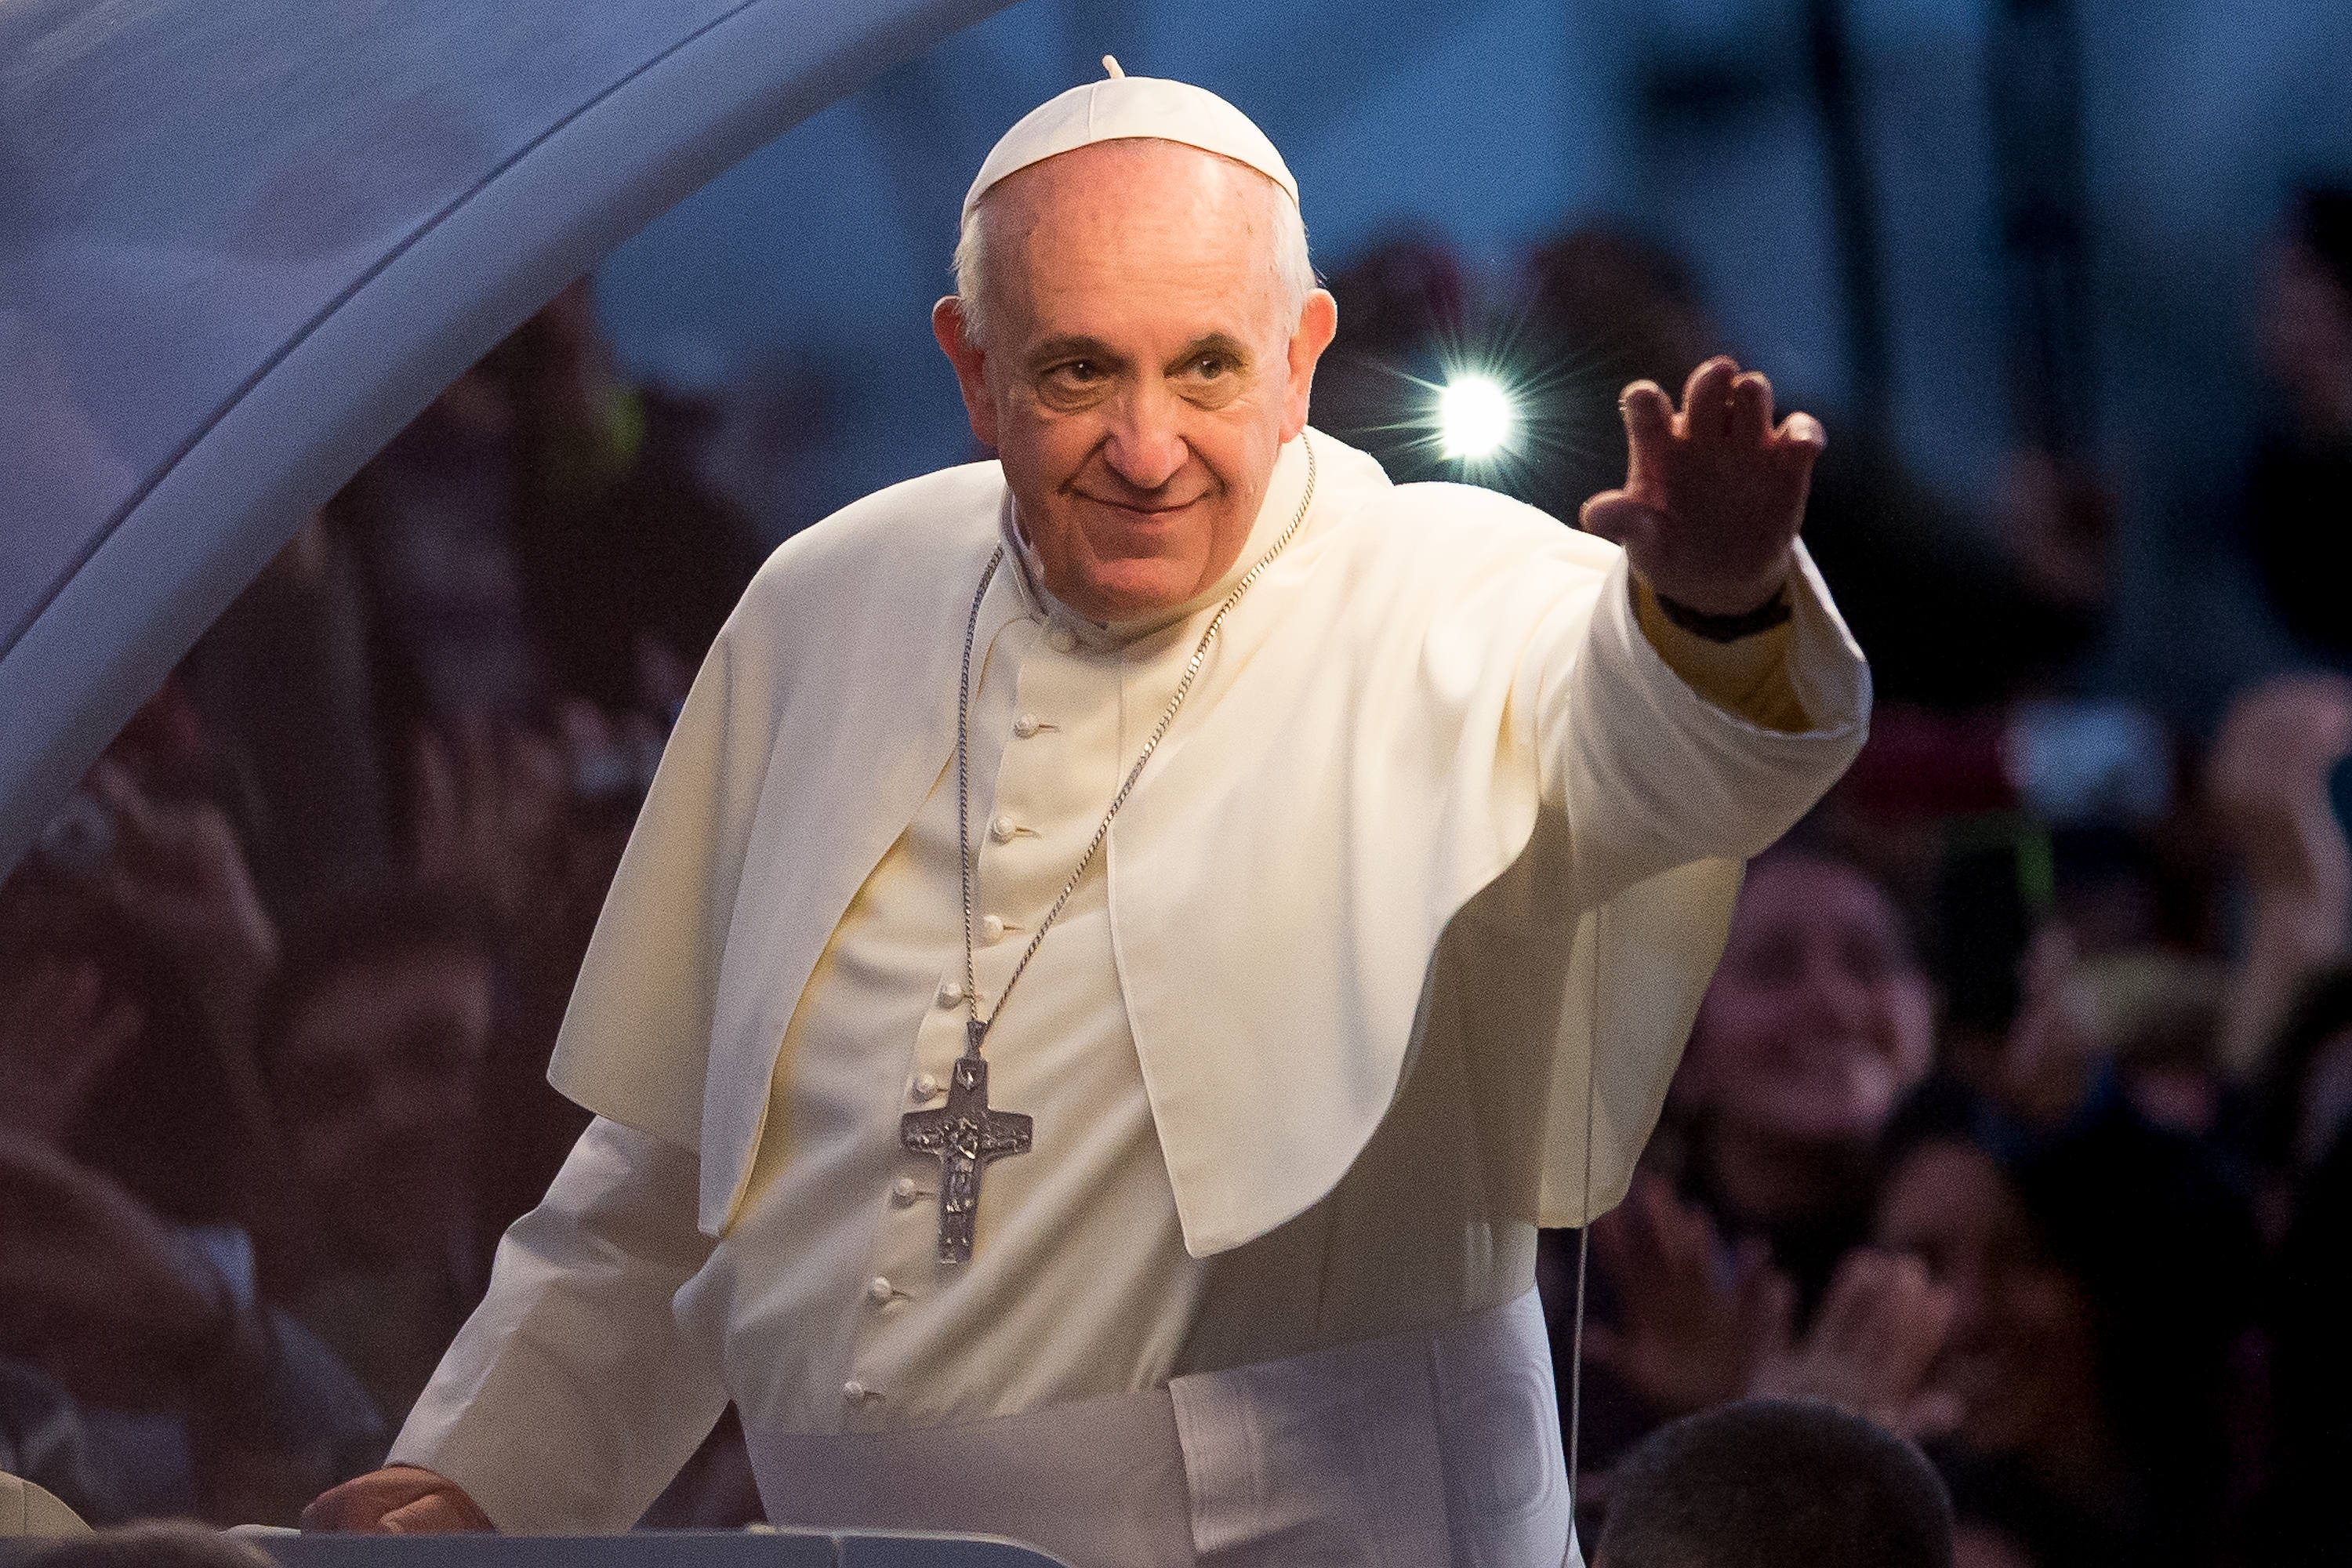 Pope Francis May Lift Celibacy Requirement for Priests